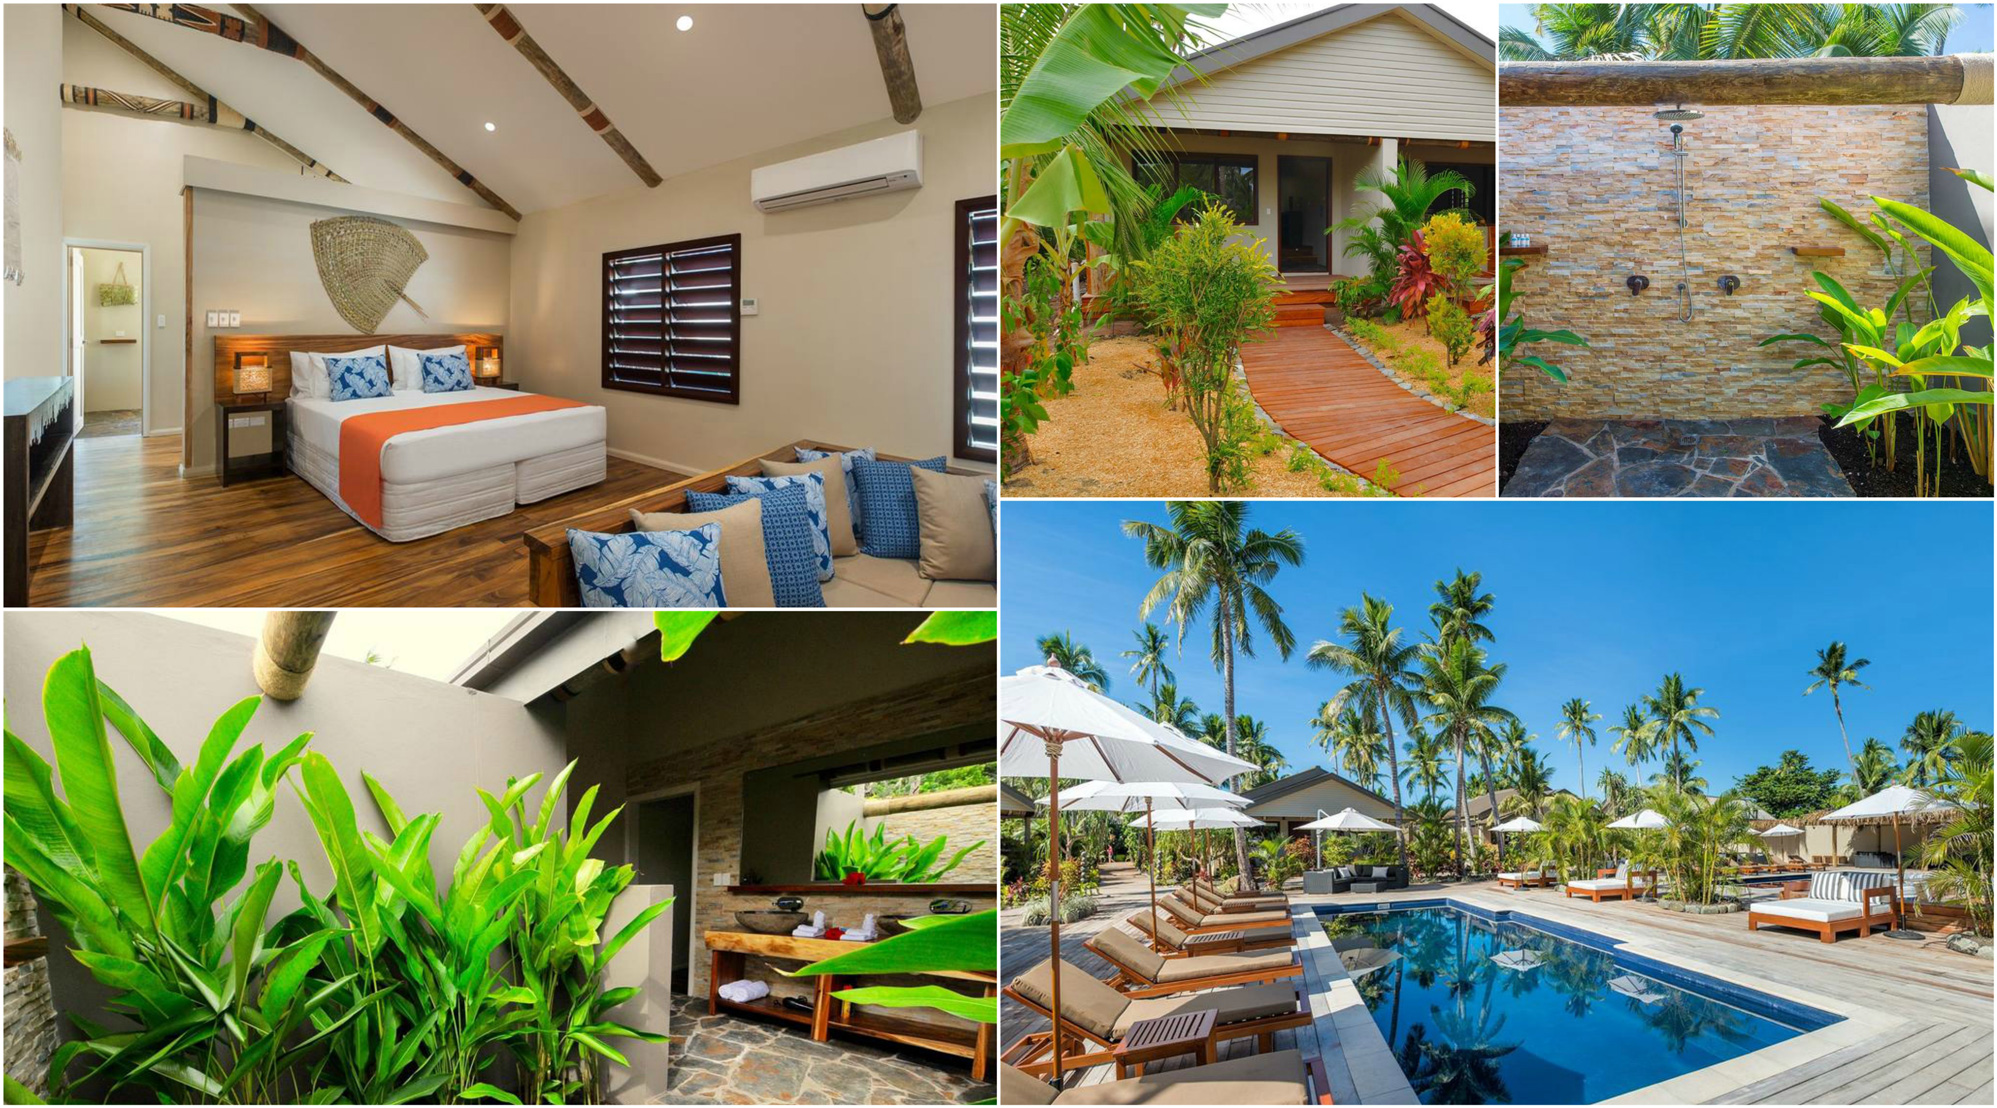 Accommodation during vacation in Fiji